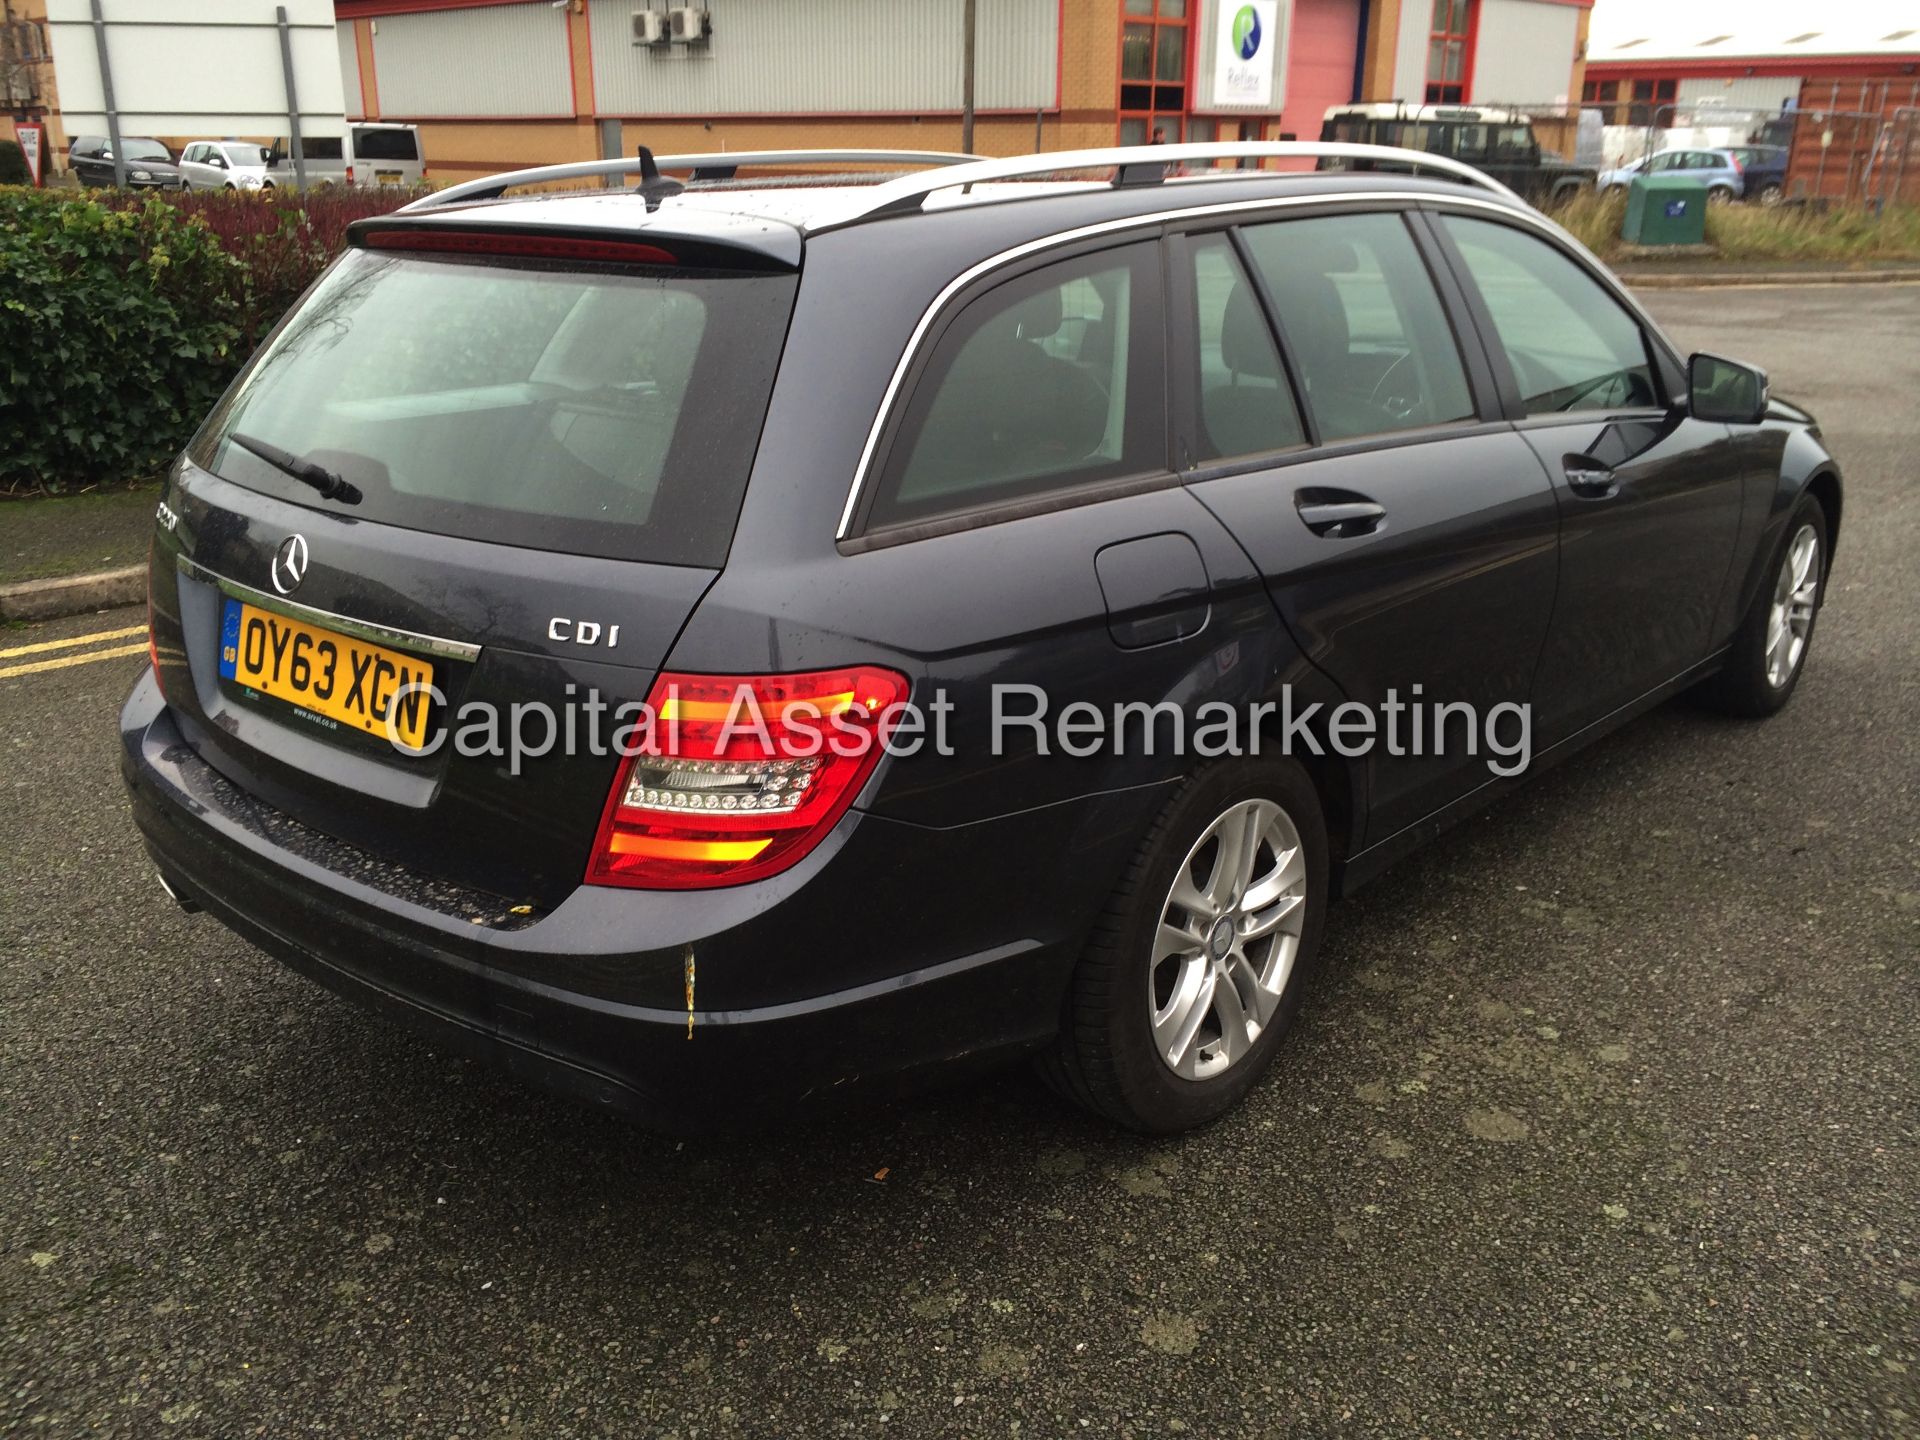 (ON SALE) MERCEDES-BENZ C220 CDI (2013 - 63 REG) 'BLUE EFFICIENCY' - 204 BHP (FACELIFT) LEATHER - Image 7 of 21